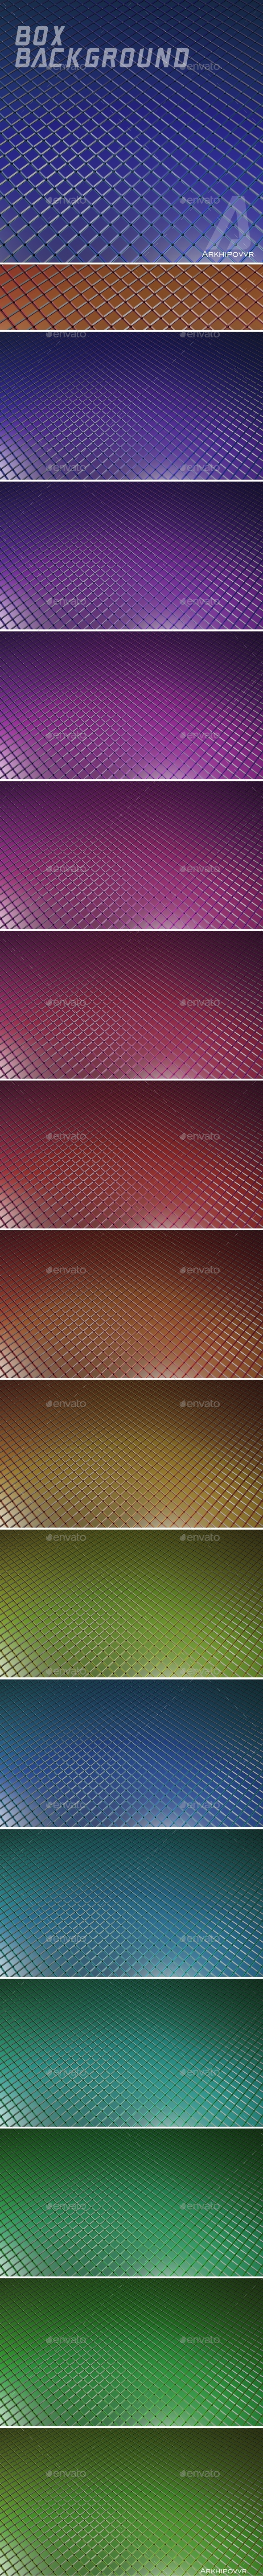 GraphicRiver Box Backgrounds 21138969